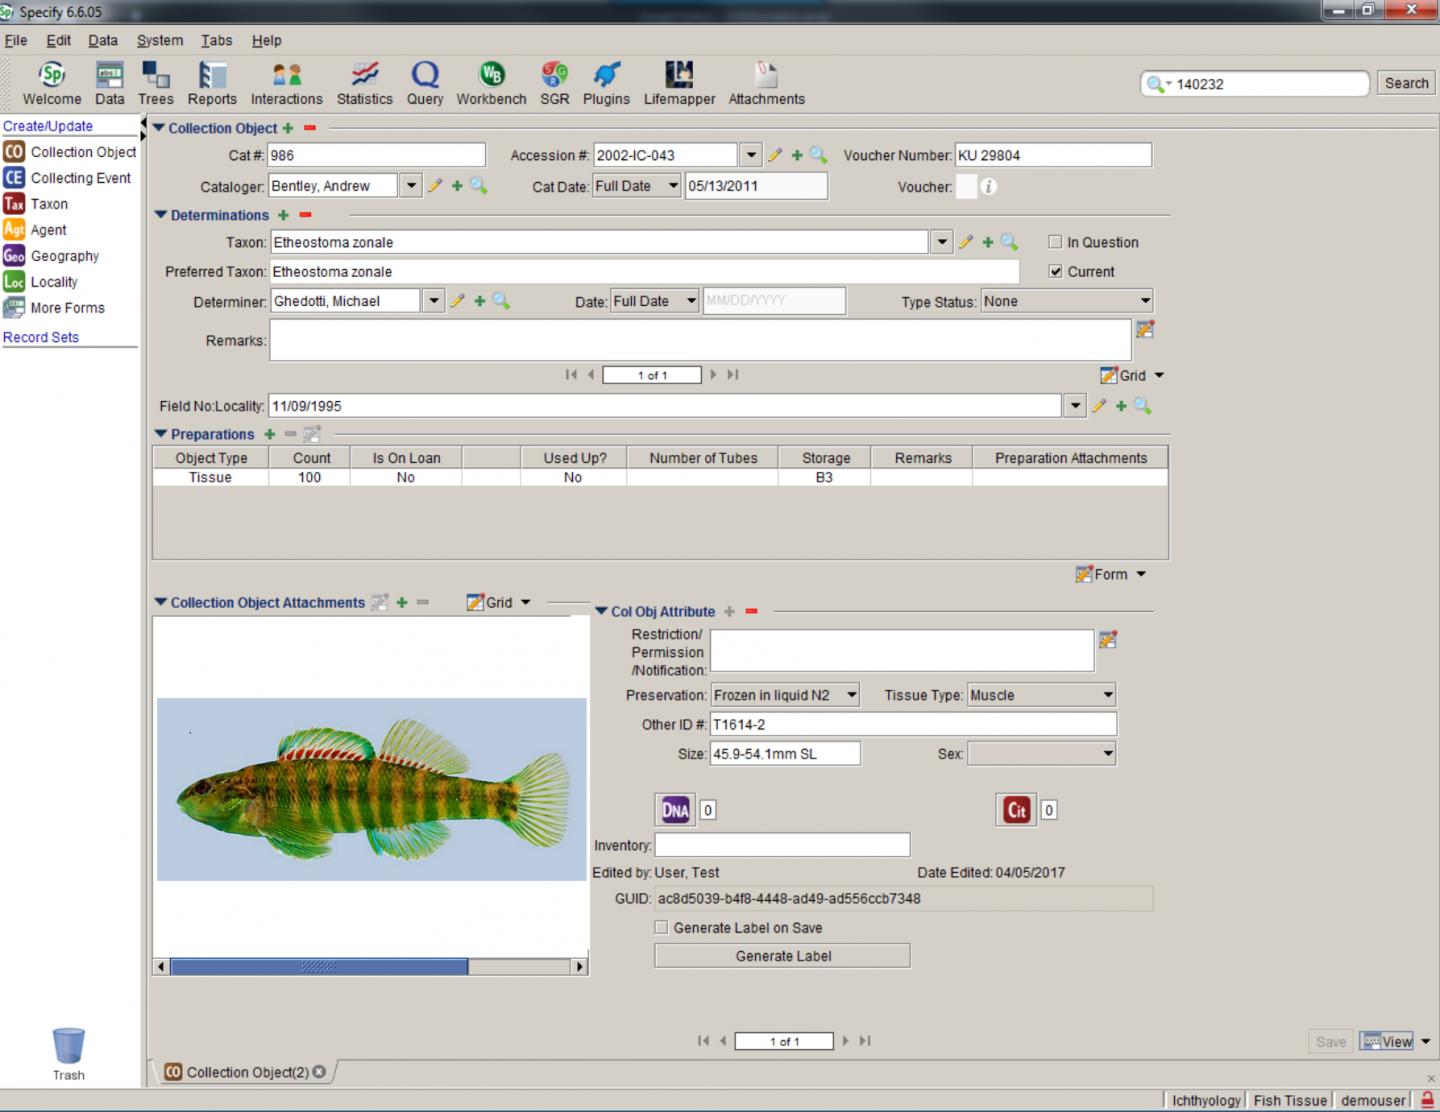 Open-Source Software for Managing Biological Collections